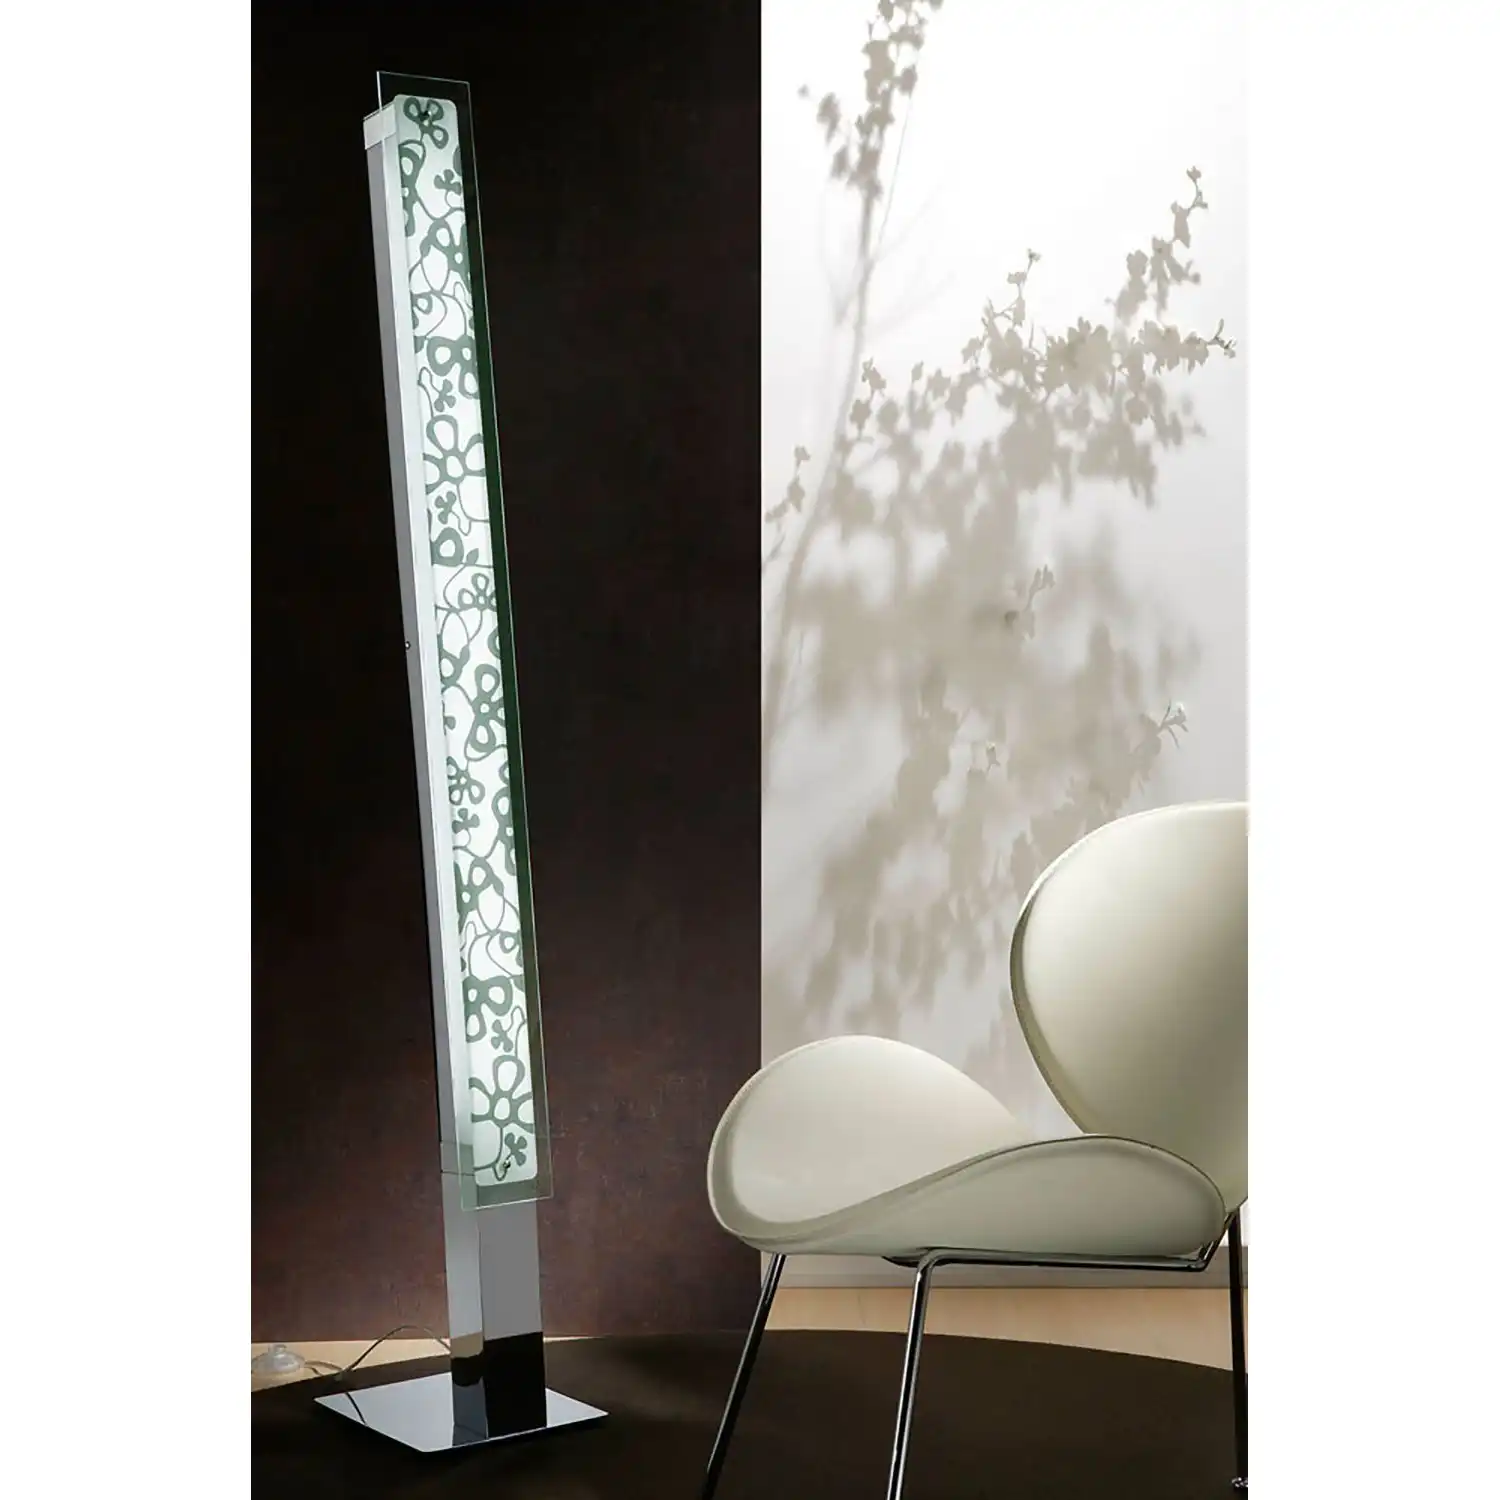 Euphoria Floor Lamp 2 Light T5, Polished Chrome Opal White Glass, NOT LED CFL Compatible